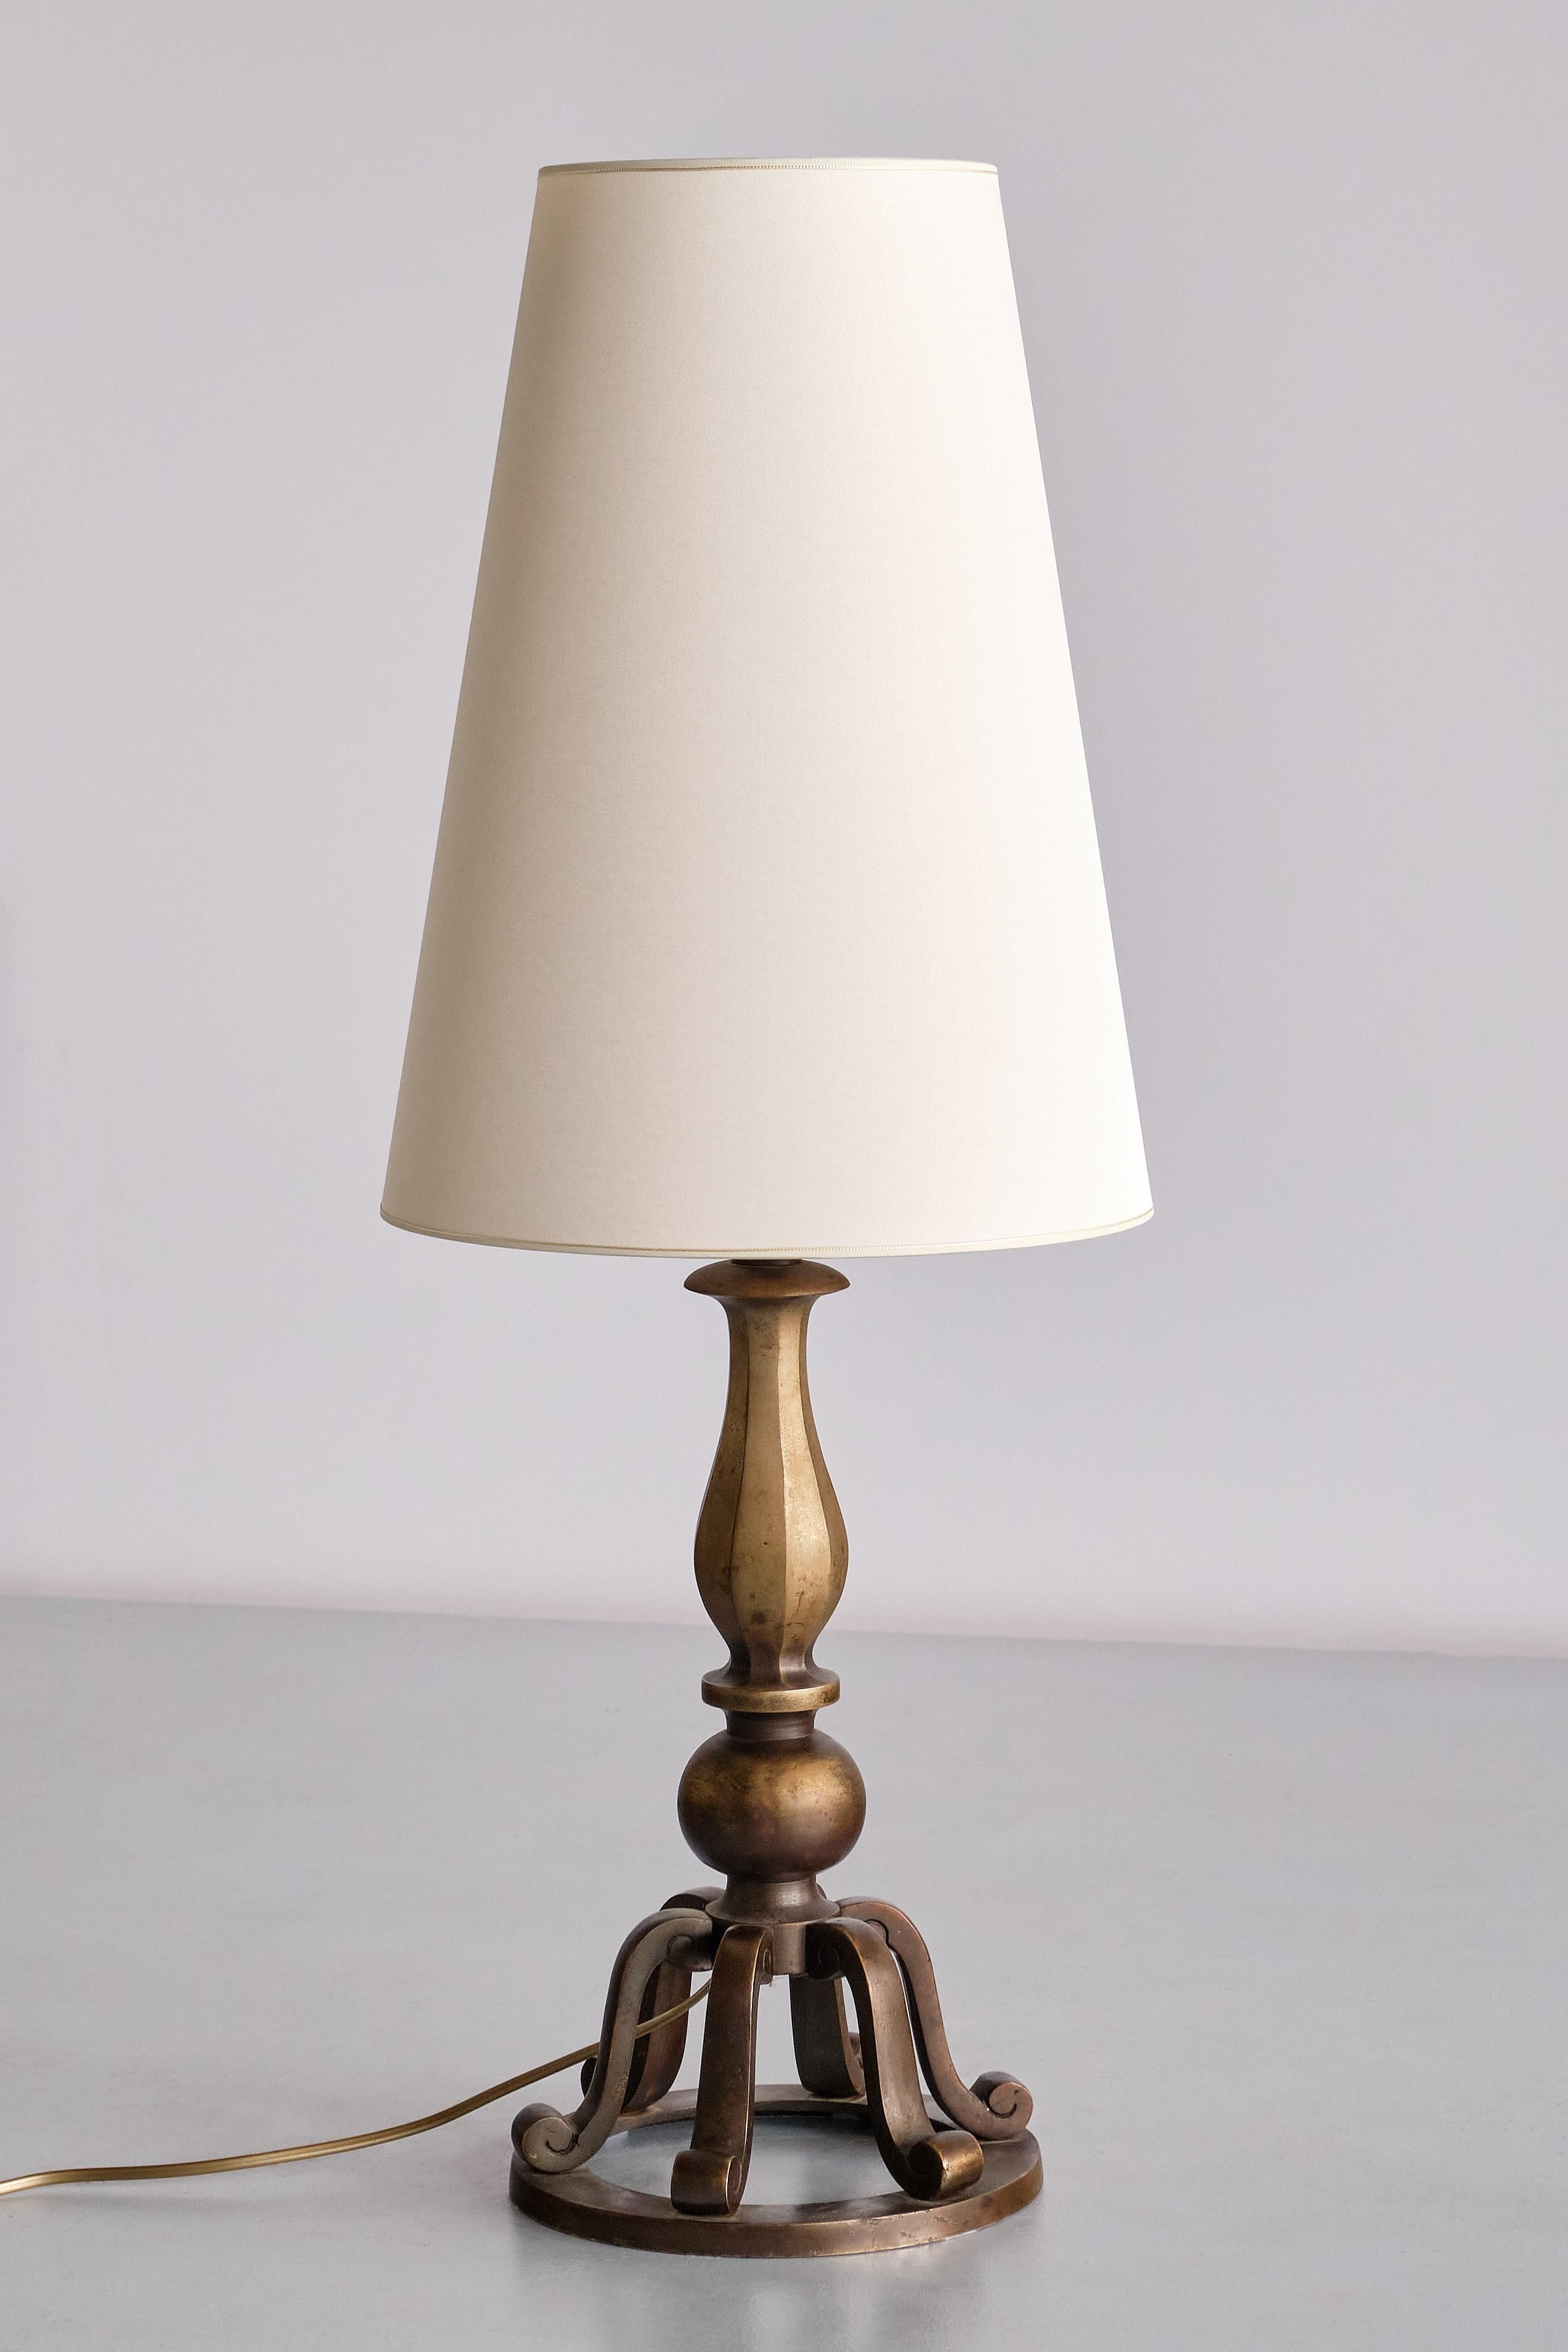 This striking table lamp was produced by the C.G. Hallberg company in the 1930s. The decorative design is characterized by the bell-shaped body in solid patinated brass. Circular base on which six curved components form a bell shape. The upper part